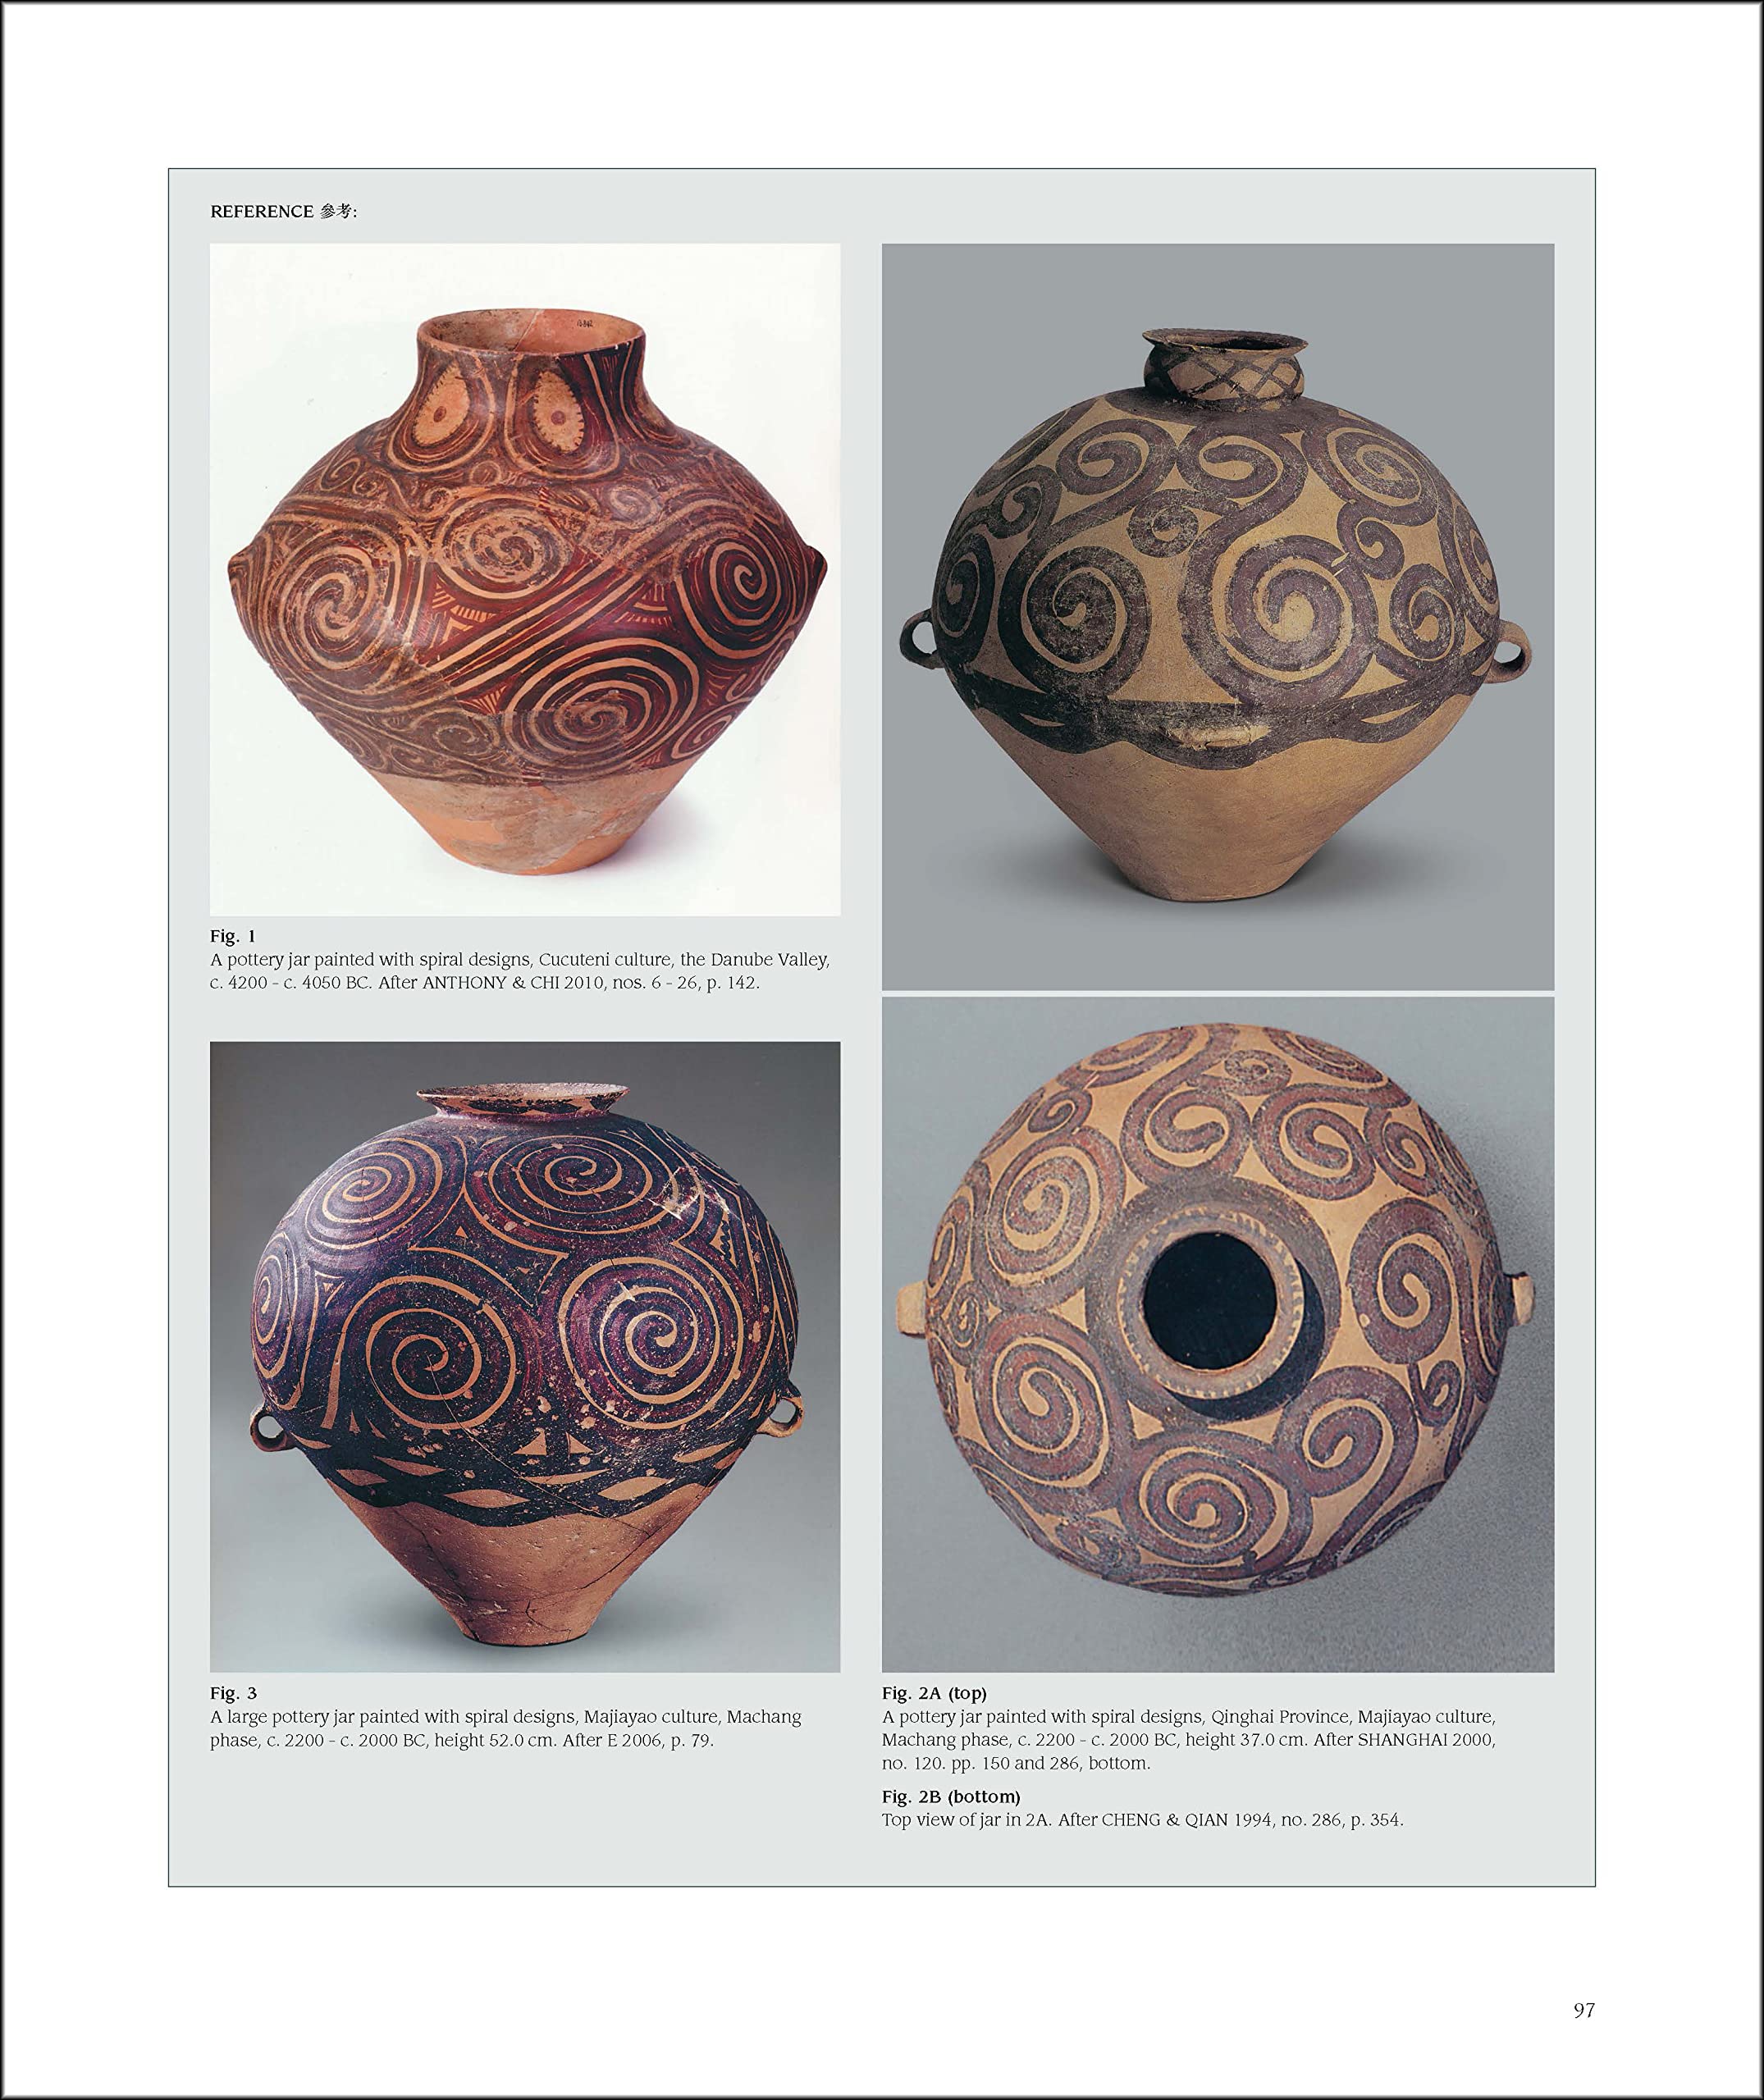 The Pottery Age: An Appreciation of Neolithic Ceramics from China Circa 7000 bc - Circa 1000 bc (Chinese and English Edition)